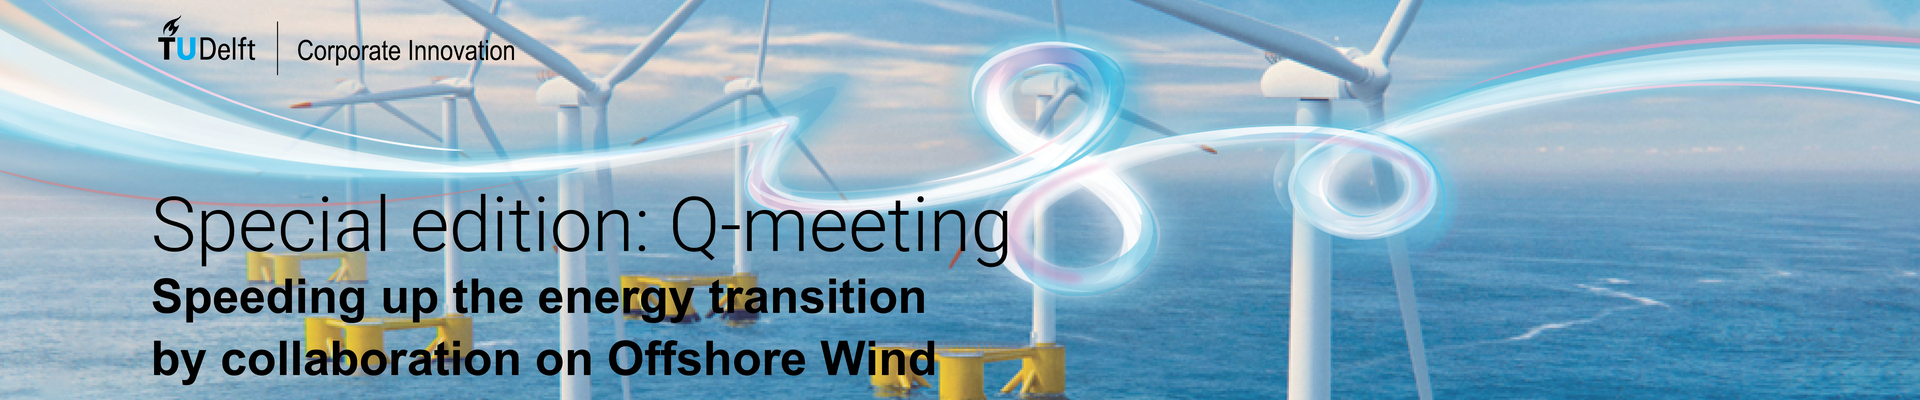 Q-meeting: Offshore Wind - Speeding up the energy transition by collaboration